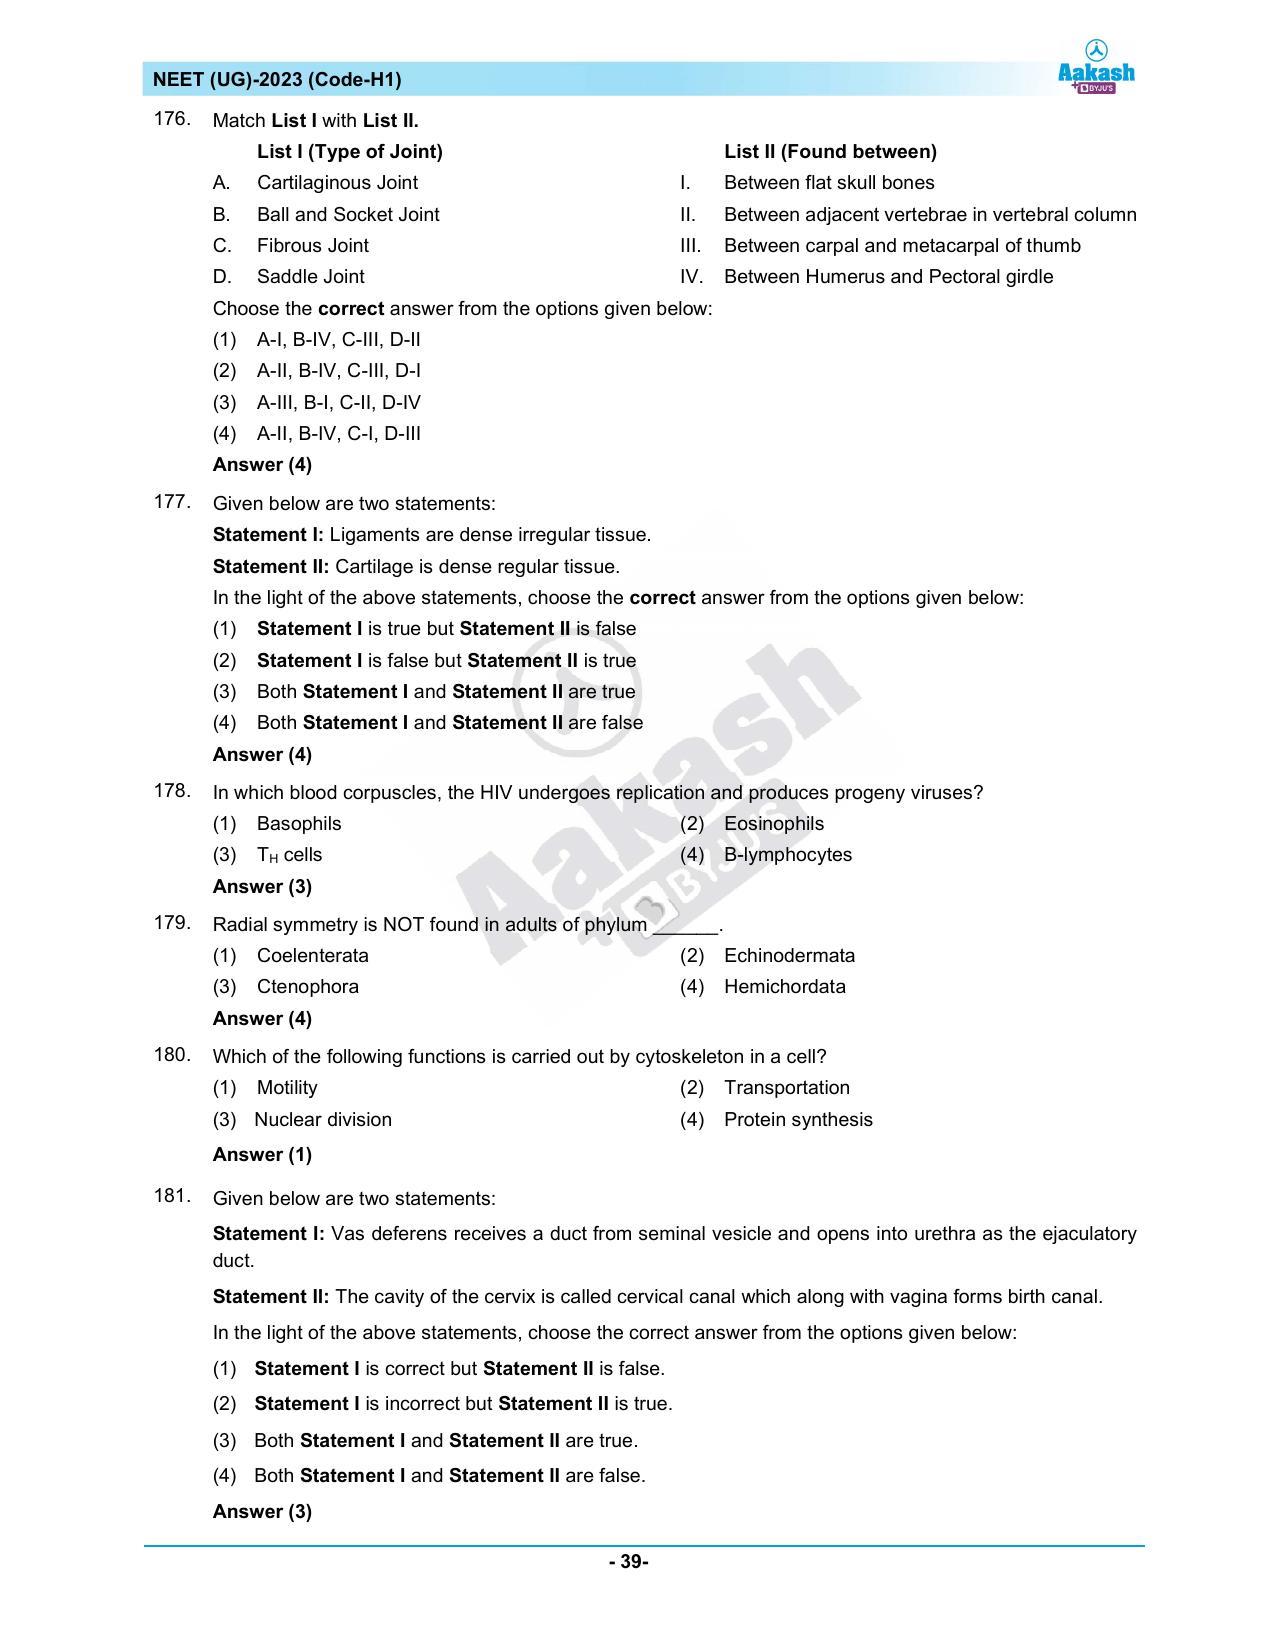 NEET 2023 Question Paper H1 - Page 39